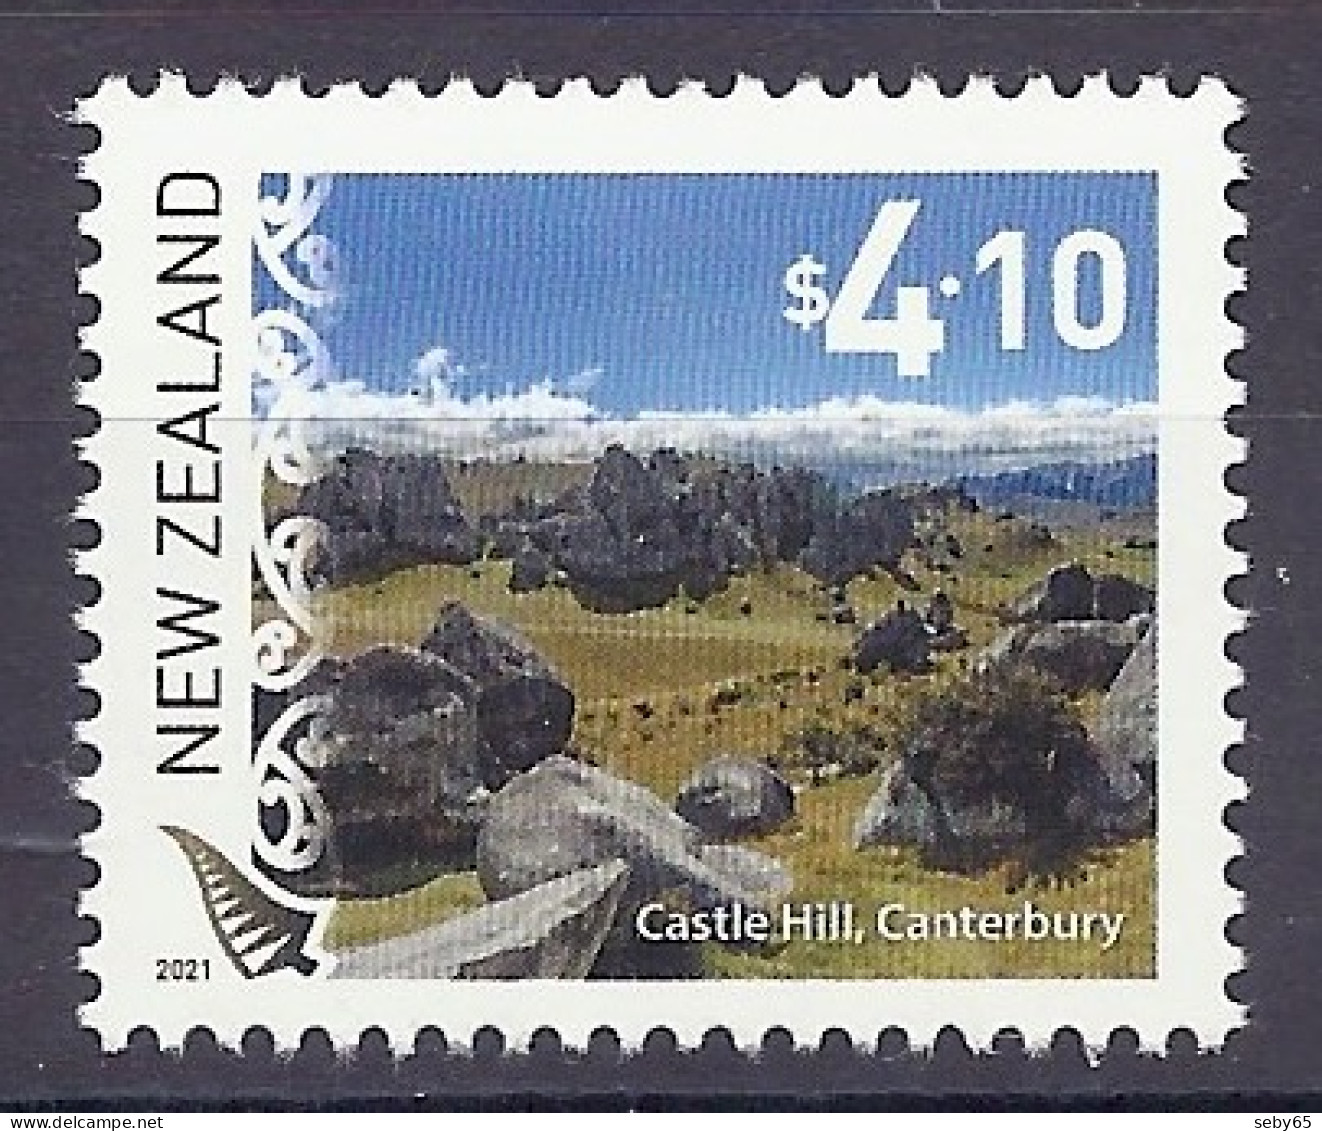 New Zealand 2021 - Definitives, Castle Hill, Canterbury, Scenic Views, Scenery, Mountains, Rocks, Landscapes - MNH - Nuovi